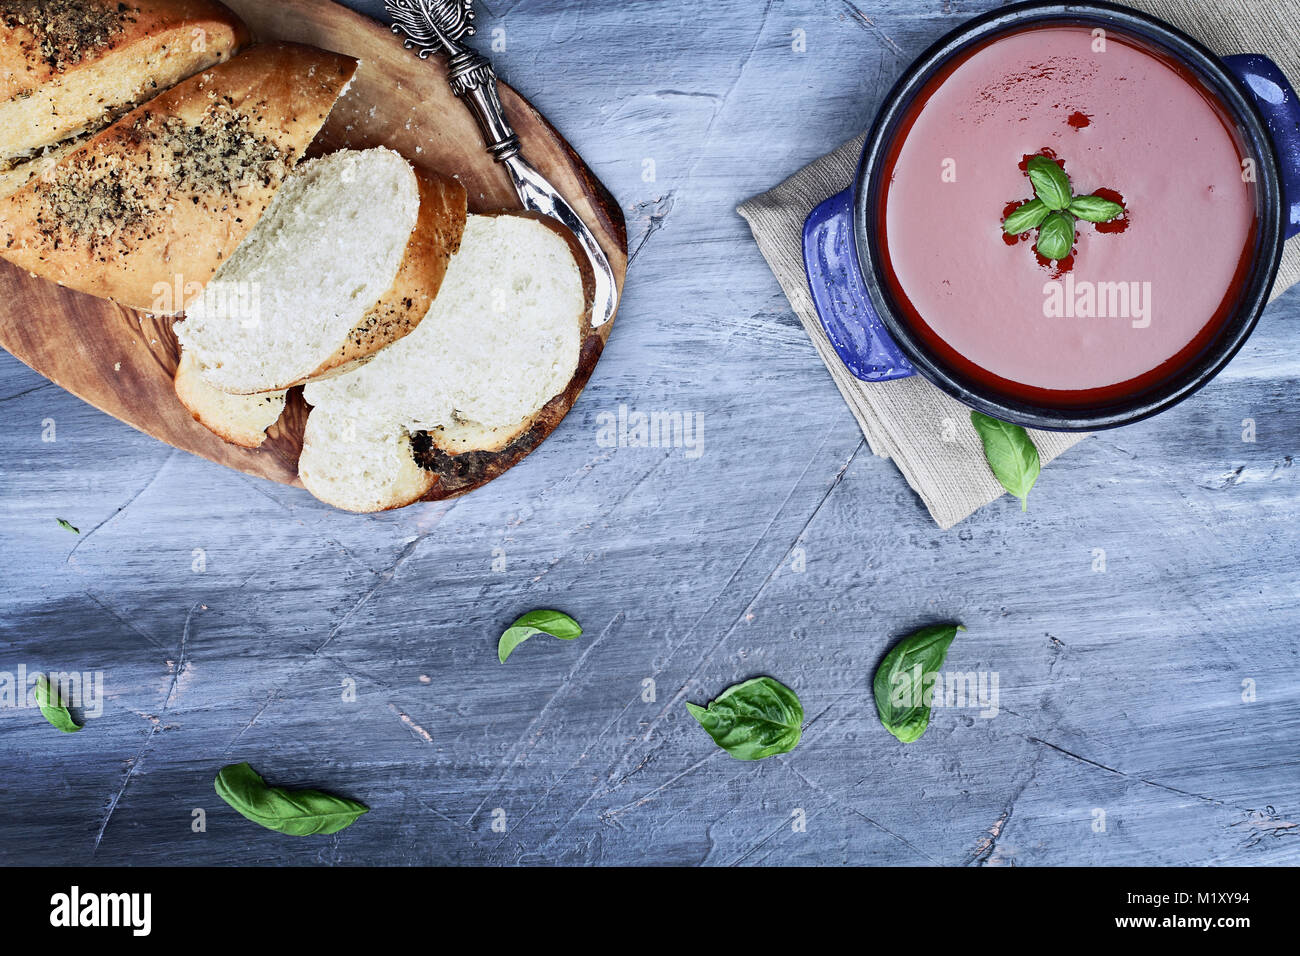 Hot tomato soup with basil leaves. Image shot from above in flat lay style. Stock Photo